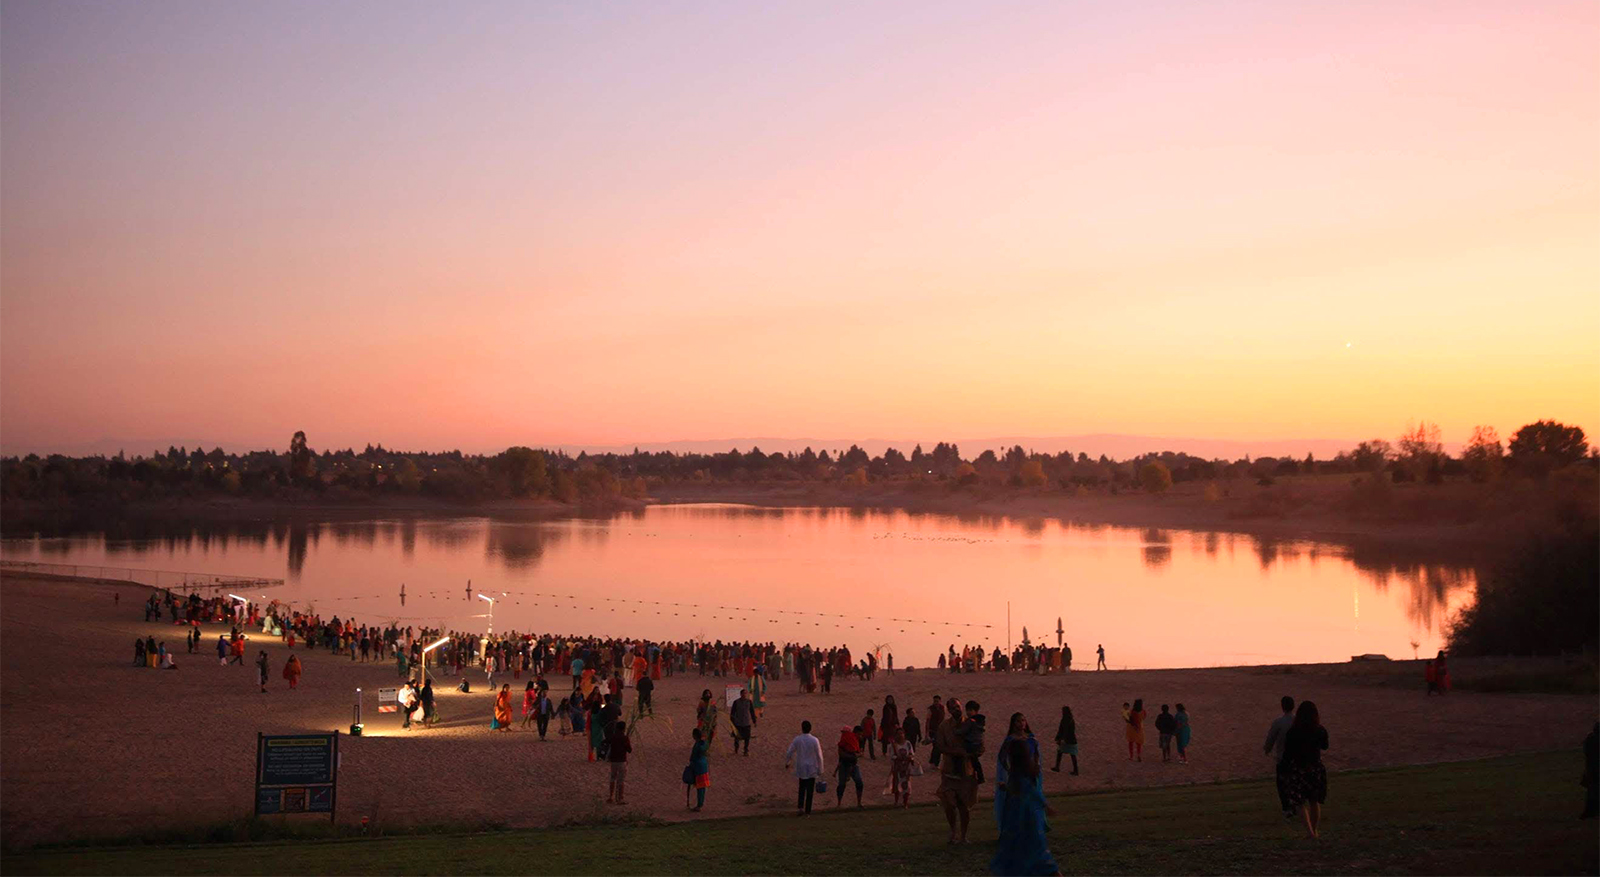 The sun sets during Chhath Puja events at Quarry Lakes Regional Recreation Area in Fremont, California, in Nov. 2019. (Photo courtesy Sunil and Shalini Singh)